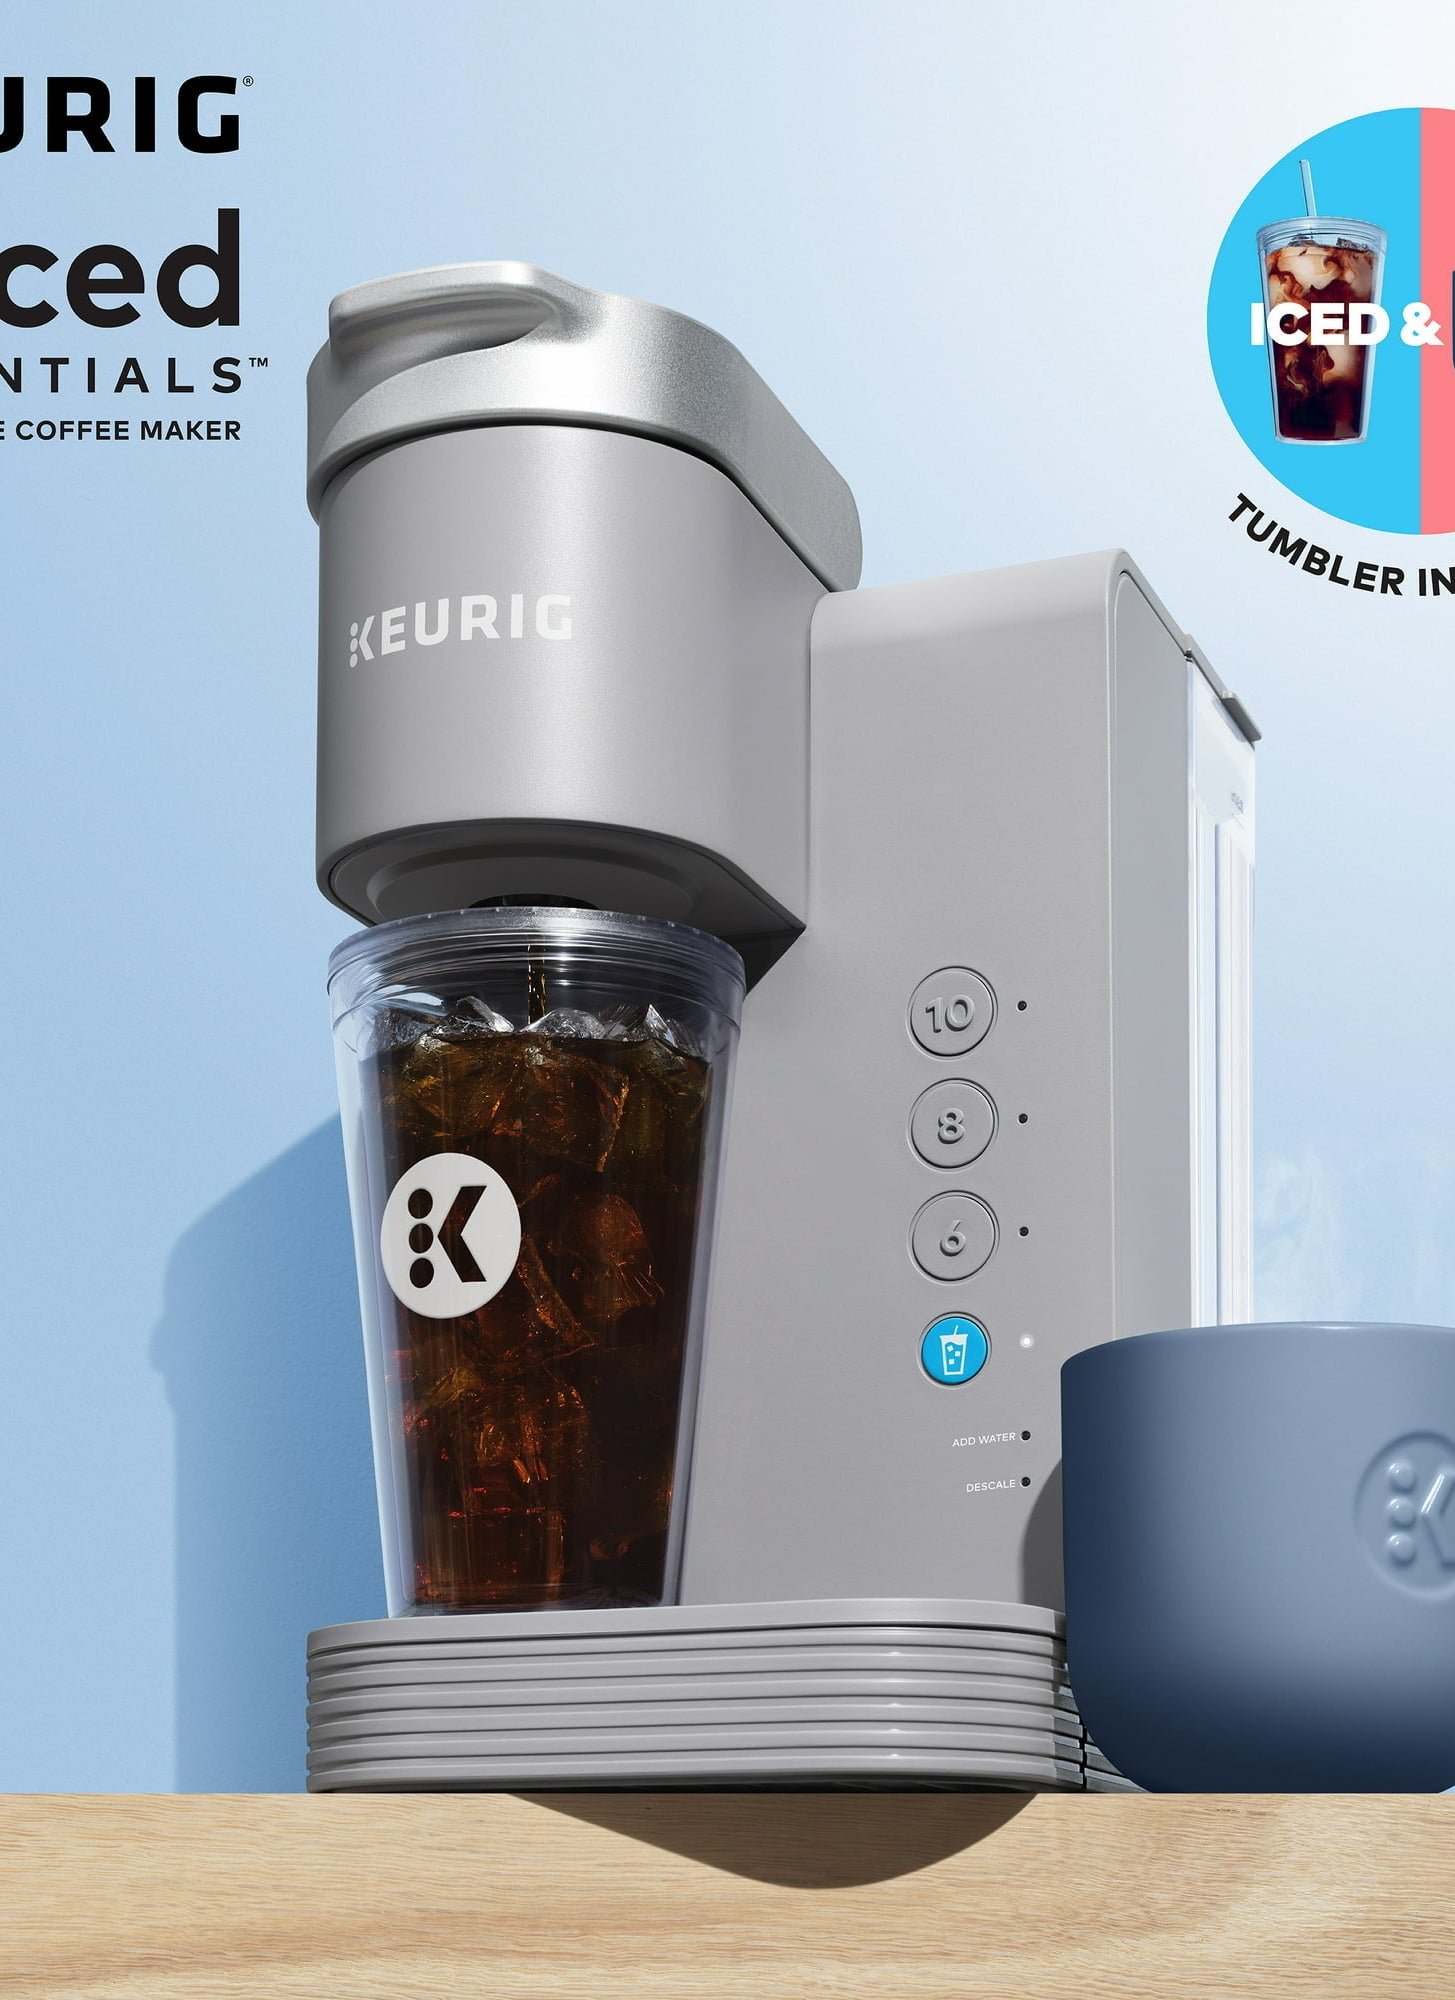 Keurig coffee machine with iced coffee in a tumbler and a hot coffee in a blue mug. Text on the image states, &quot;Iced &amp;amp; Hot, Tumbler included.&quot;